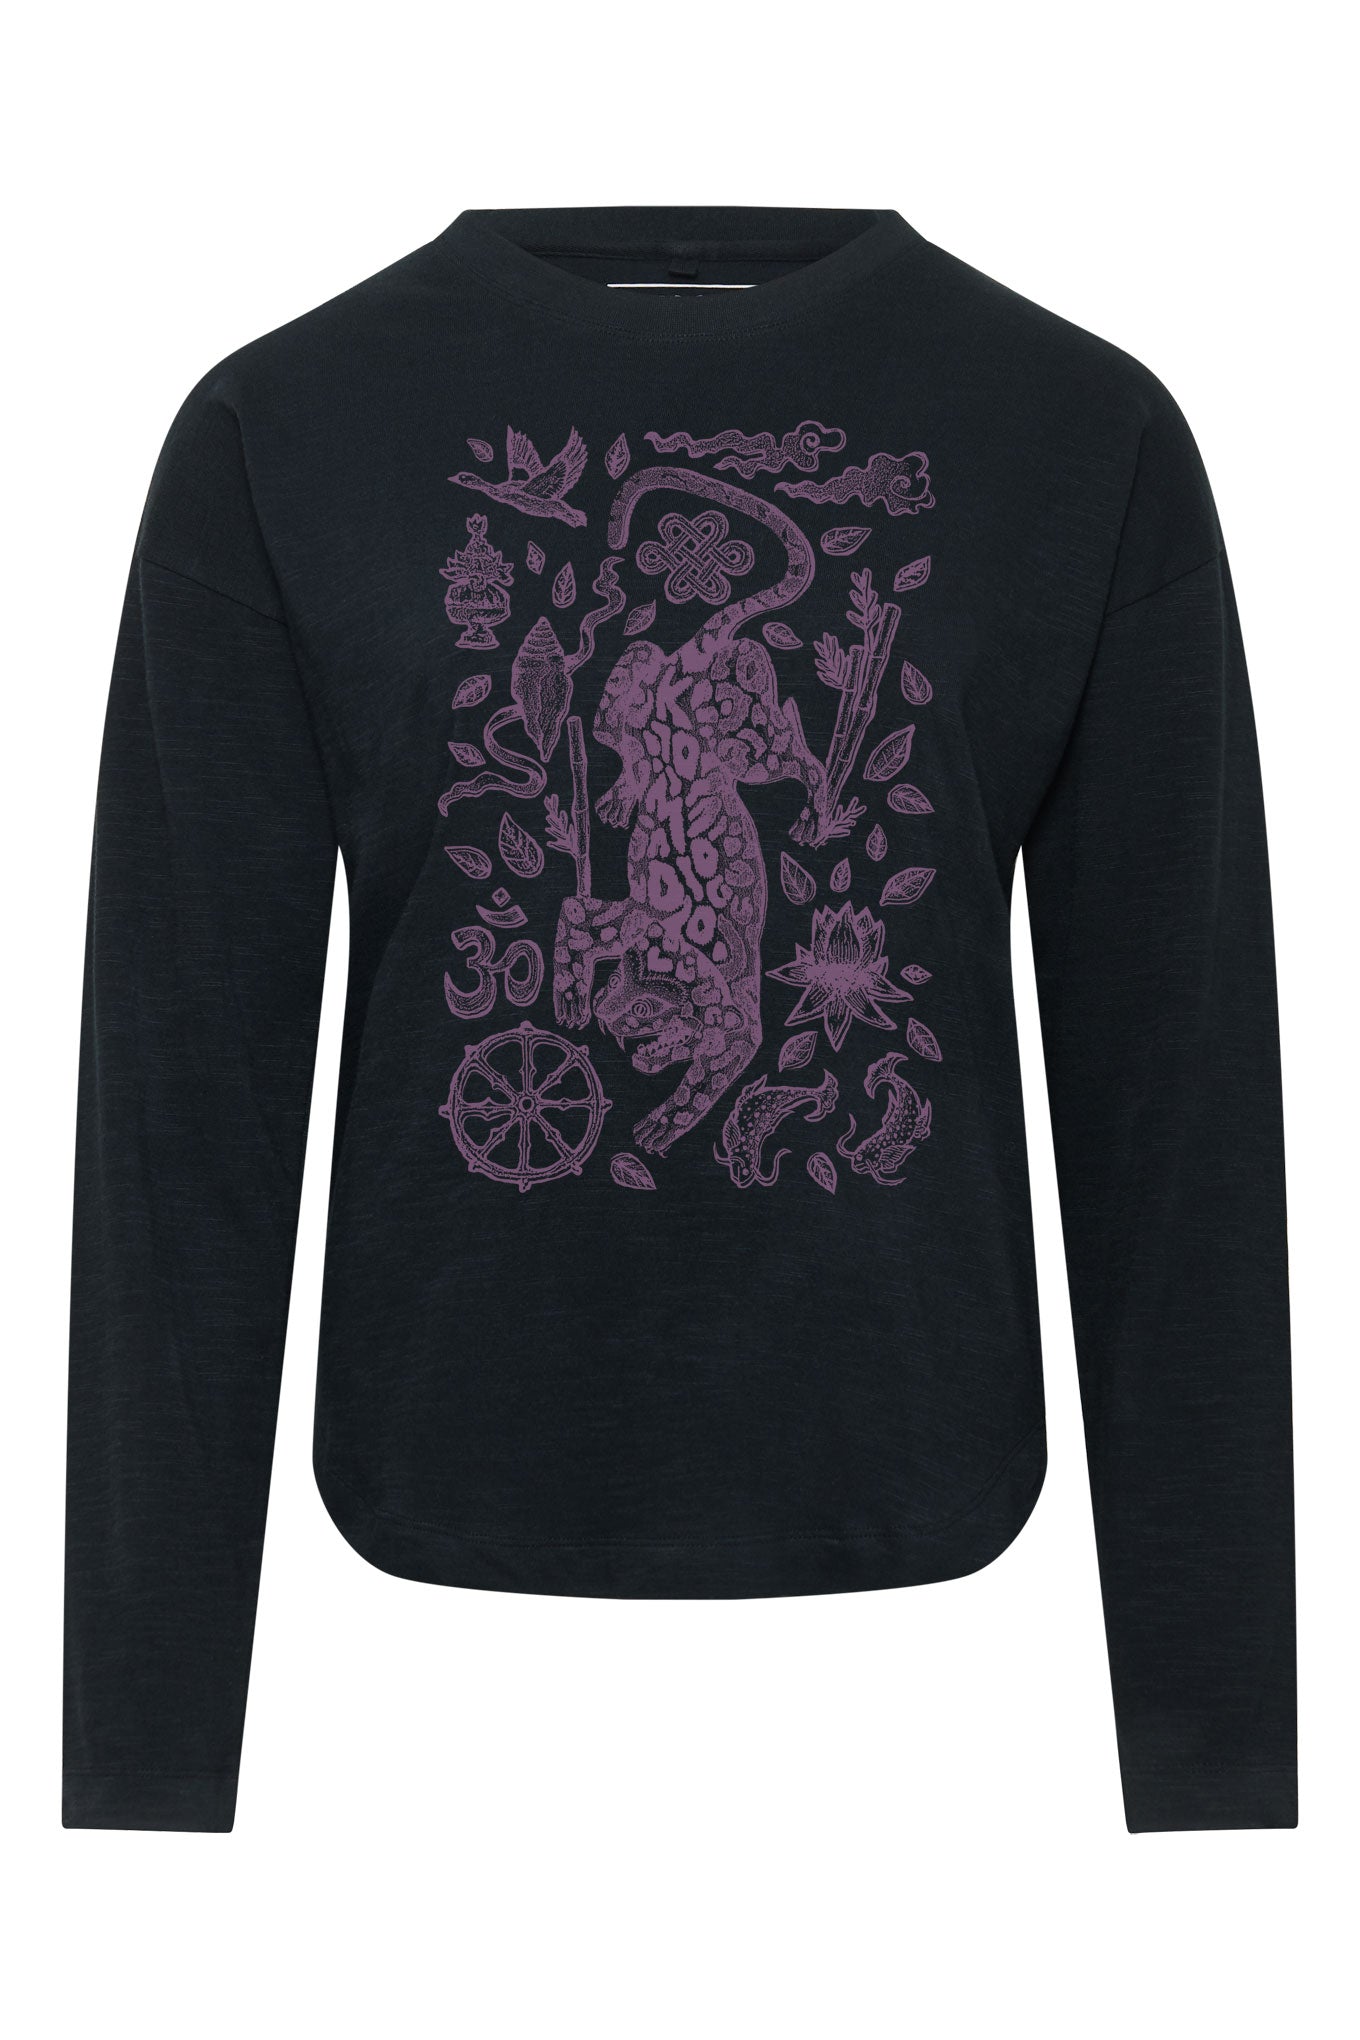 Black, long-sleeved shirt NEPALI LEOPARD made from 100% organic cotton by Komodo